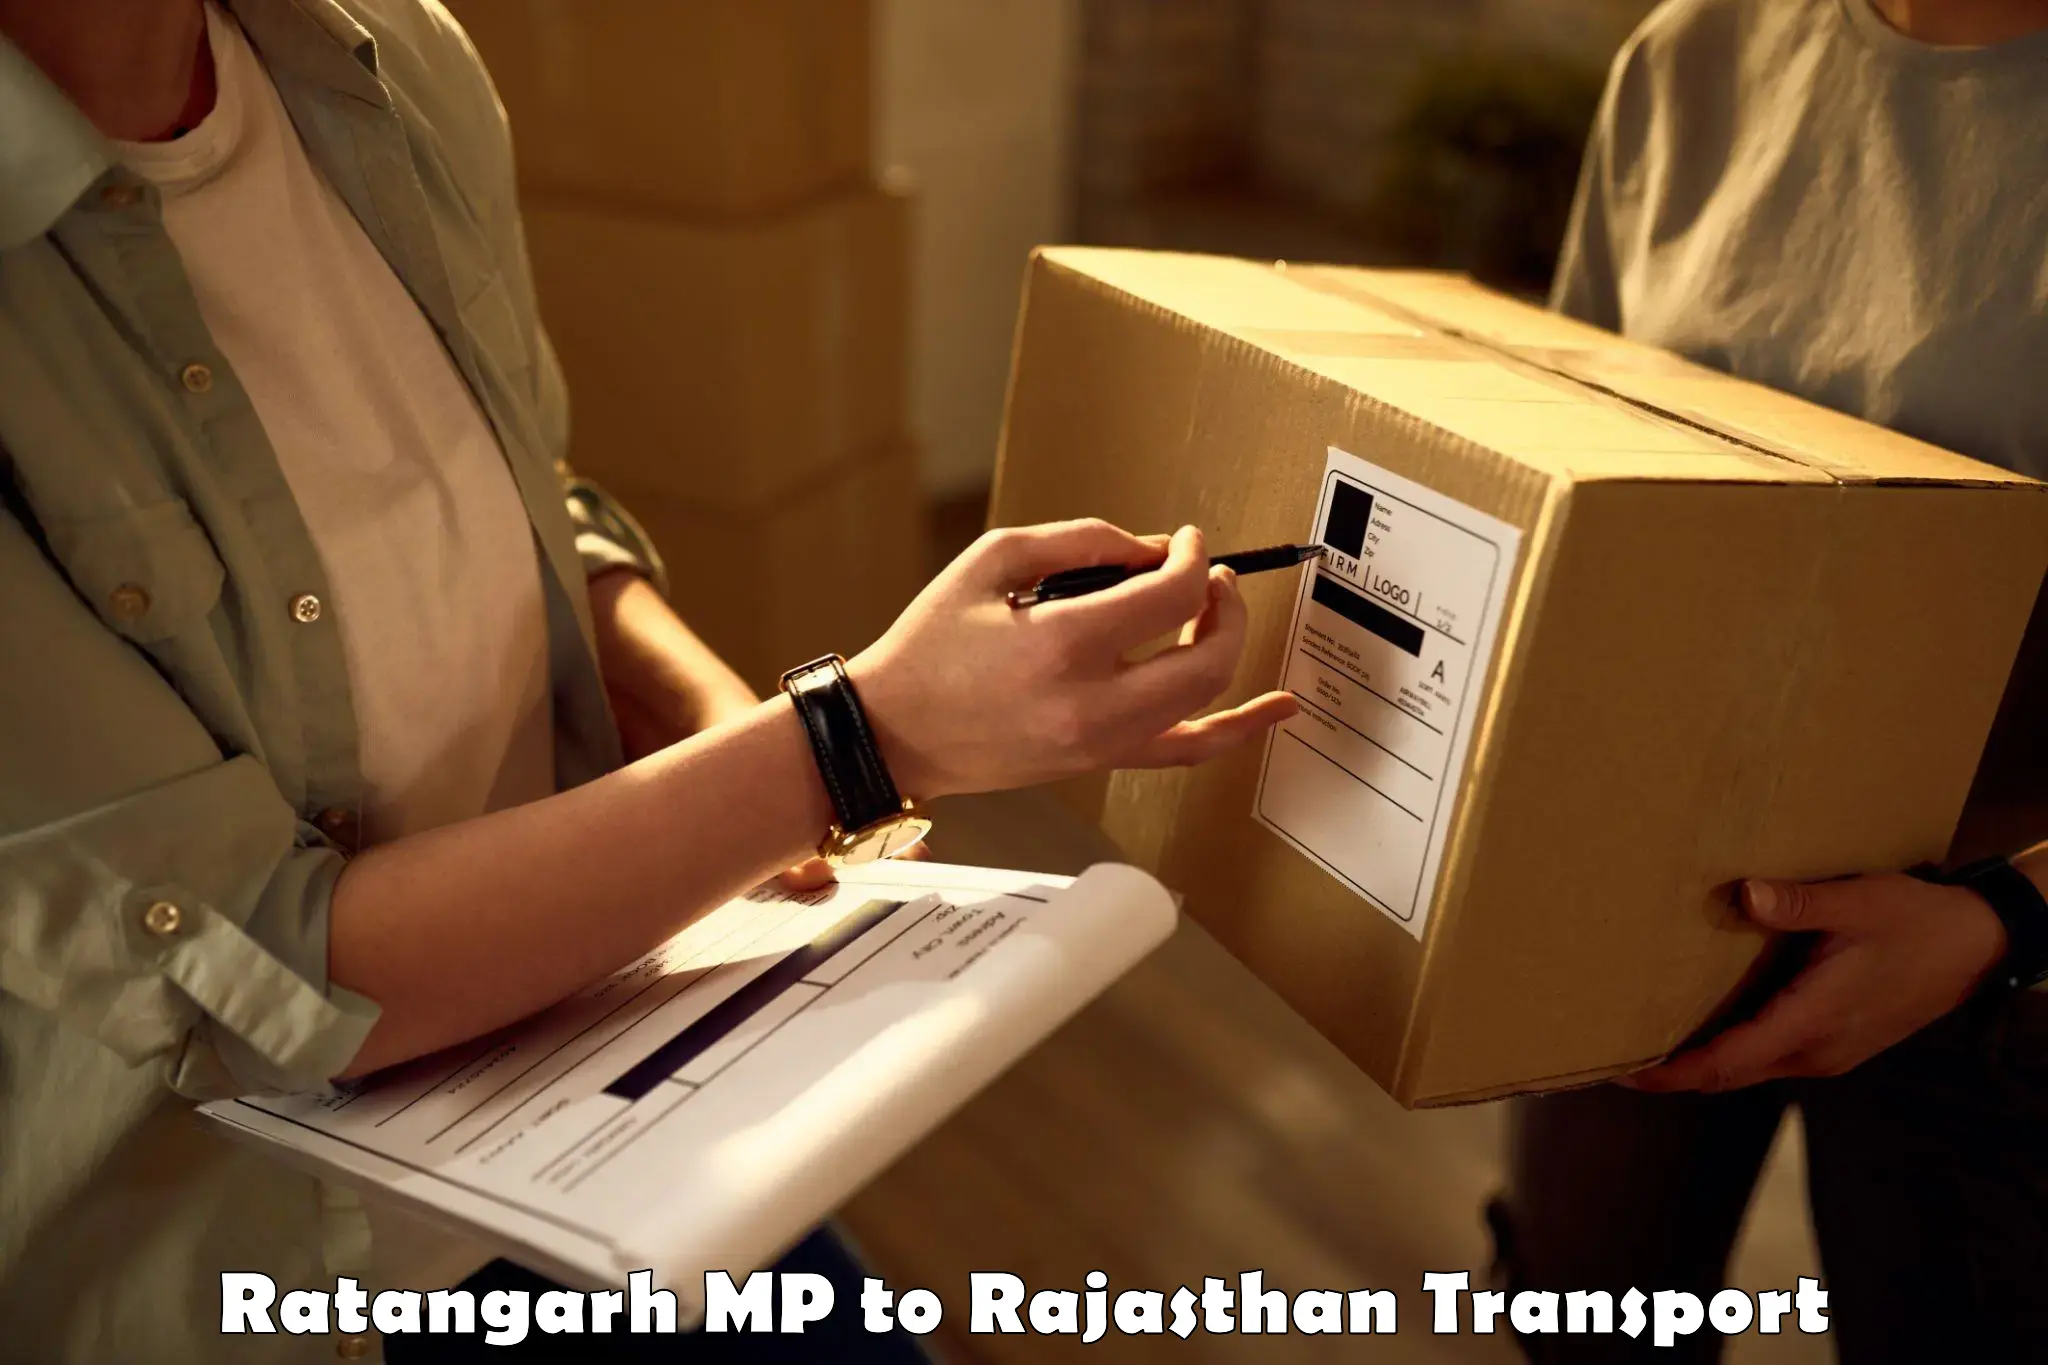 Delivery service Ratangarh MP to Mathania